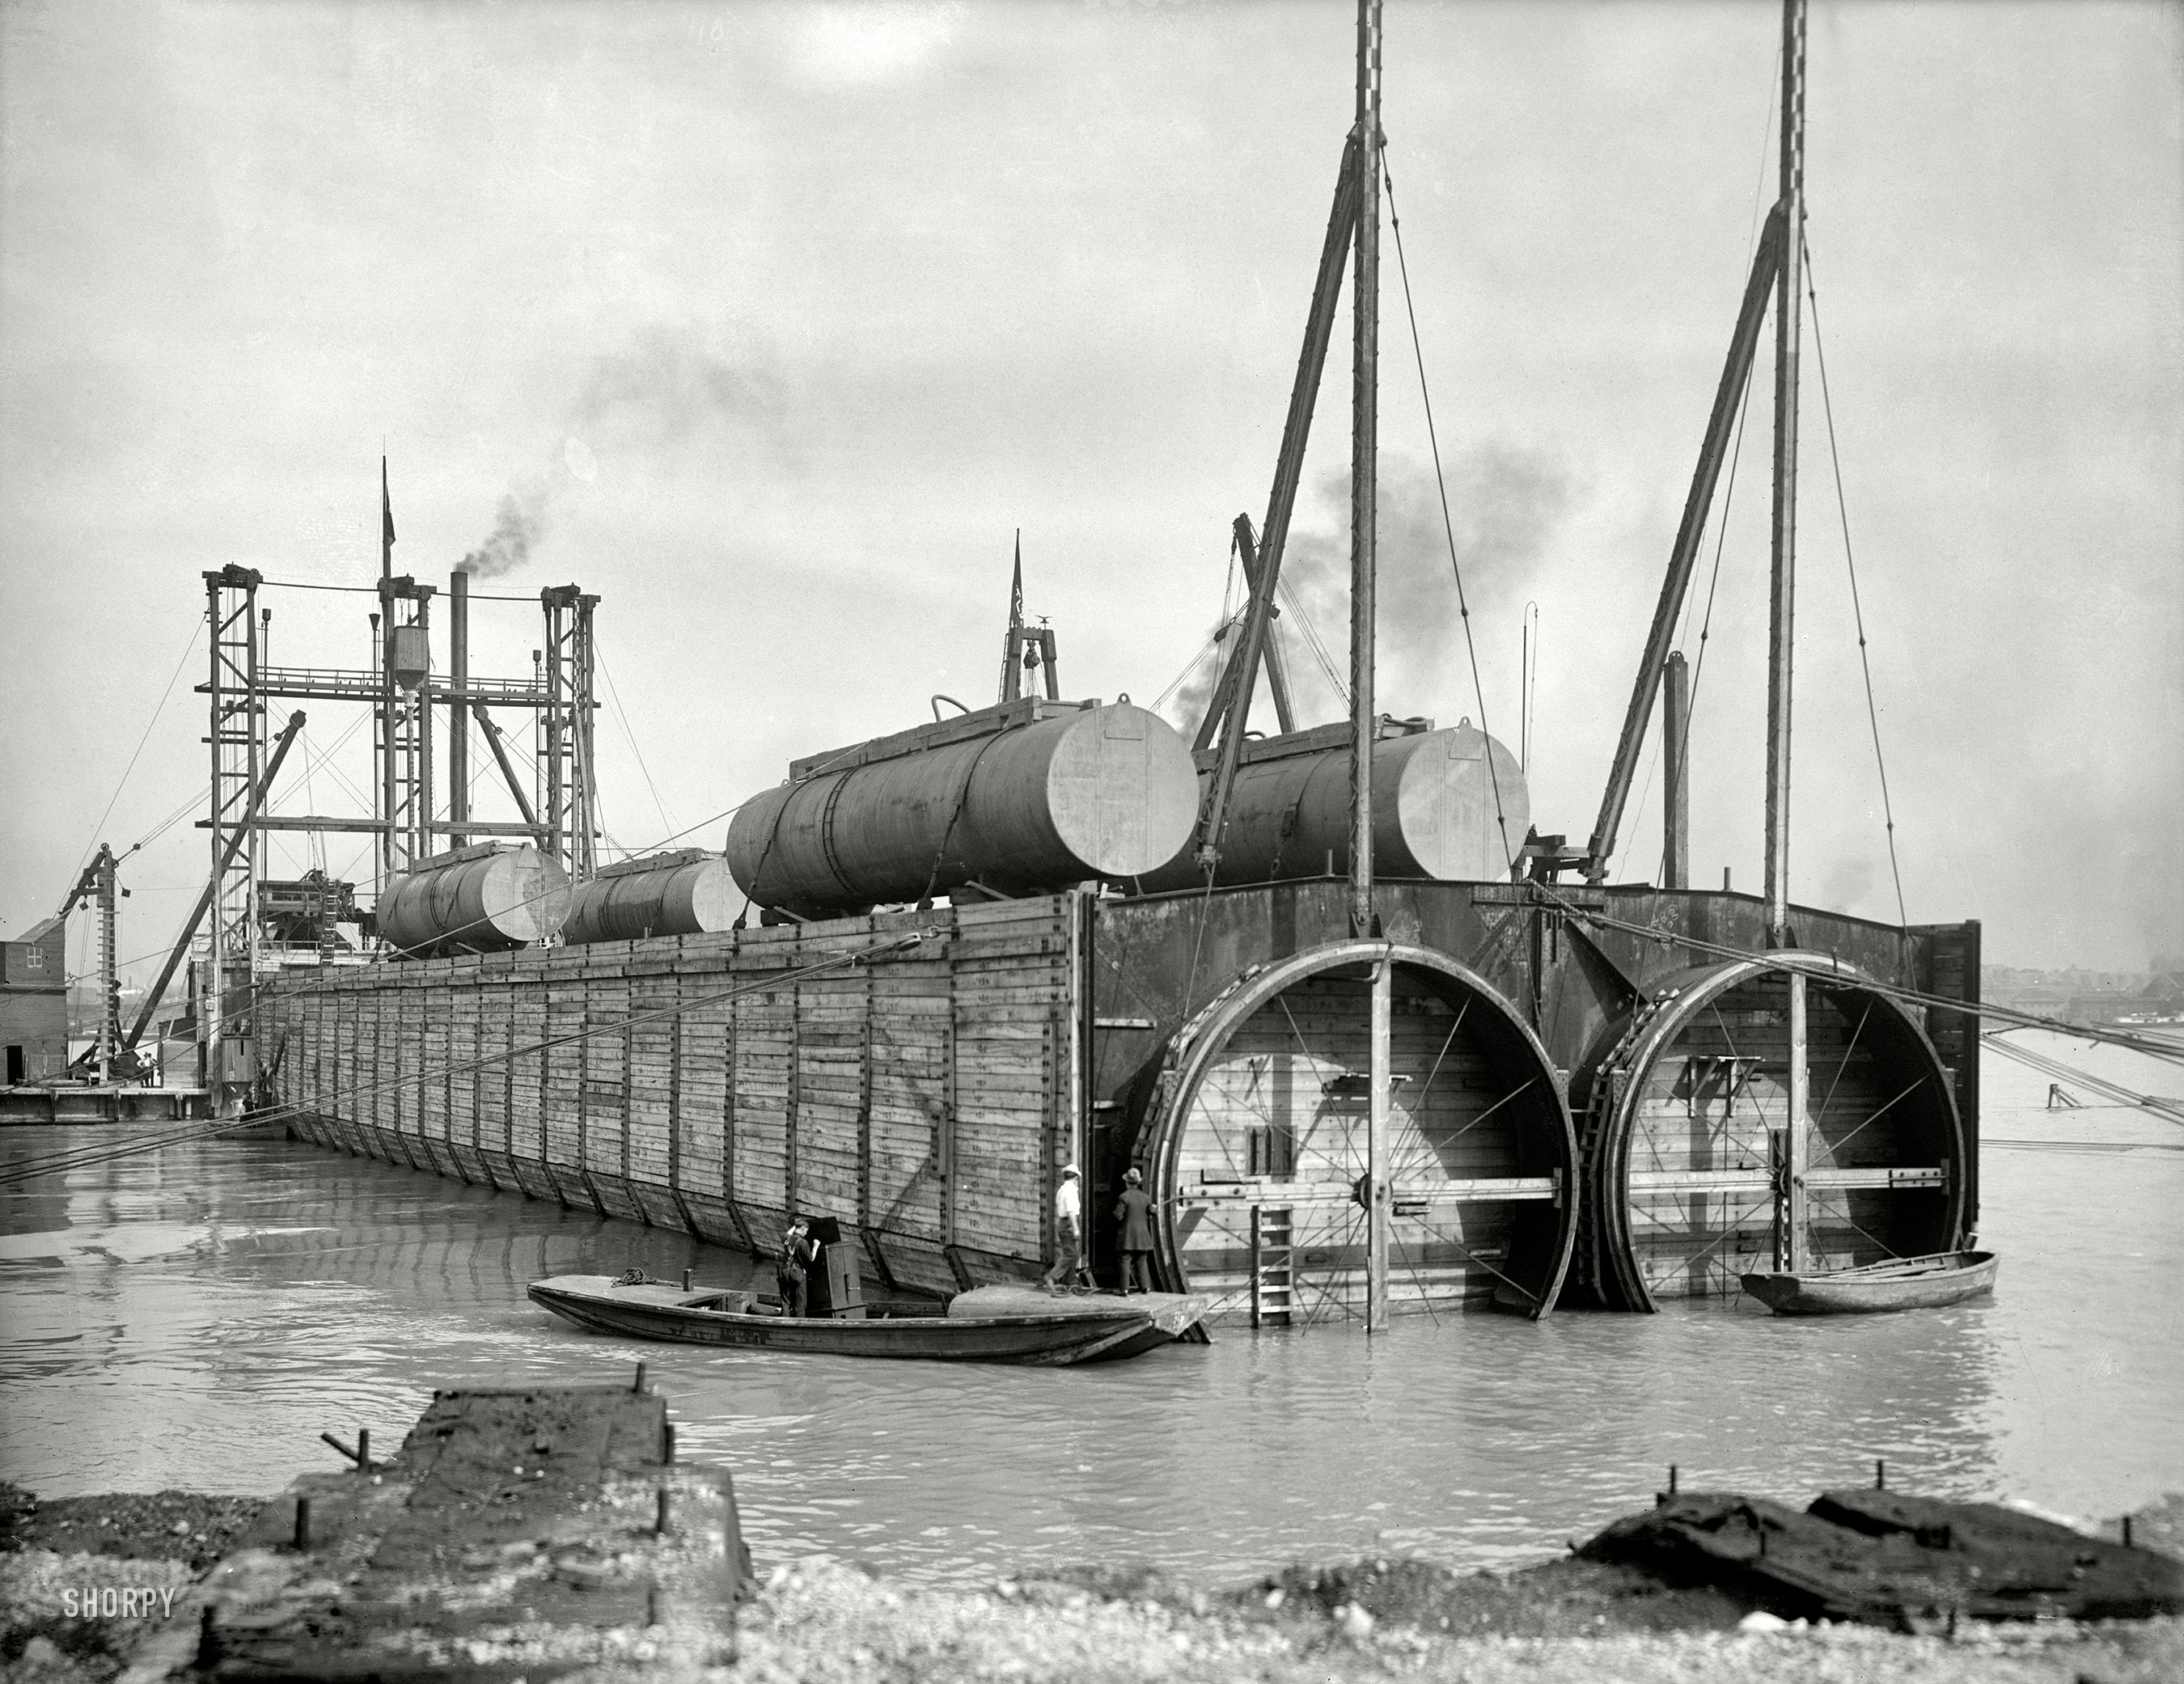 The Detroit River circa 1910. "Sinking last tubular section, Michigan Central R.R. tunnel. W.S. Kinnear, Chief Engineer, Butler Bros. Construction Co., contractors." 6½ x 8½ inch glass negative, Detroit Publishing Company. View full size.